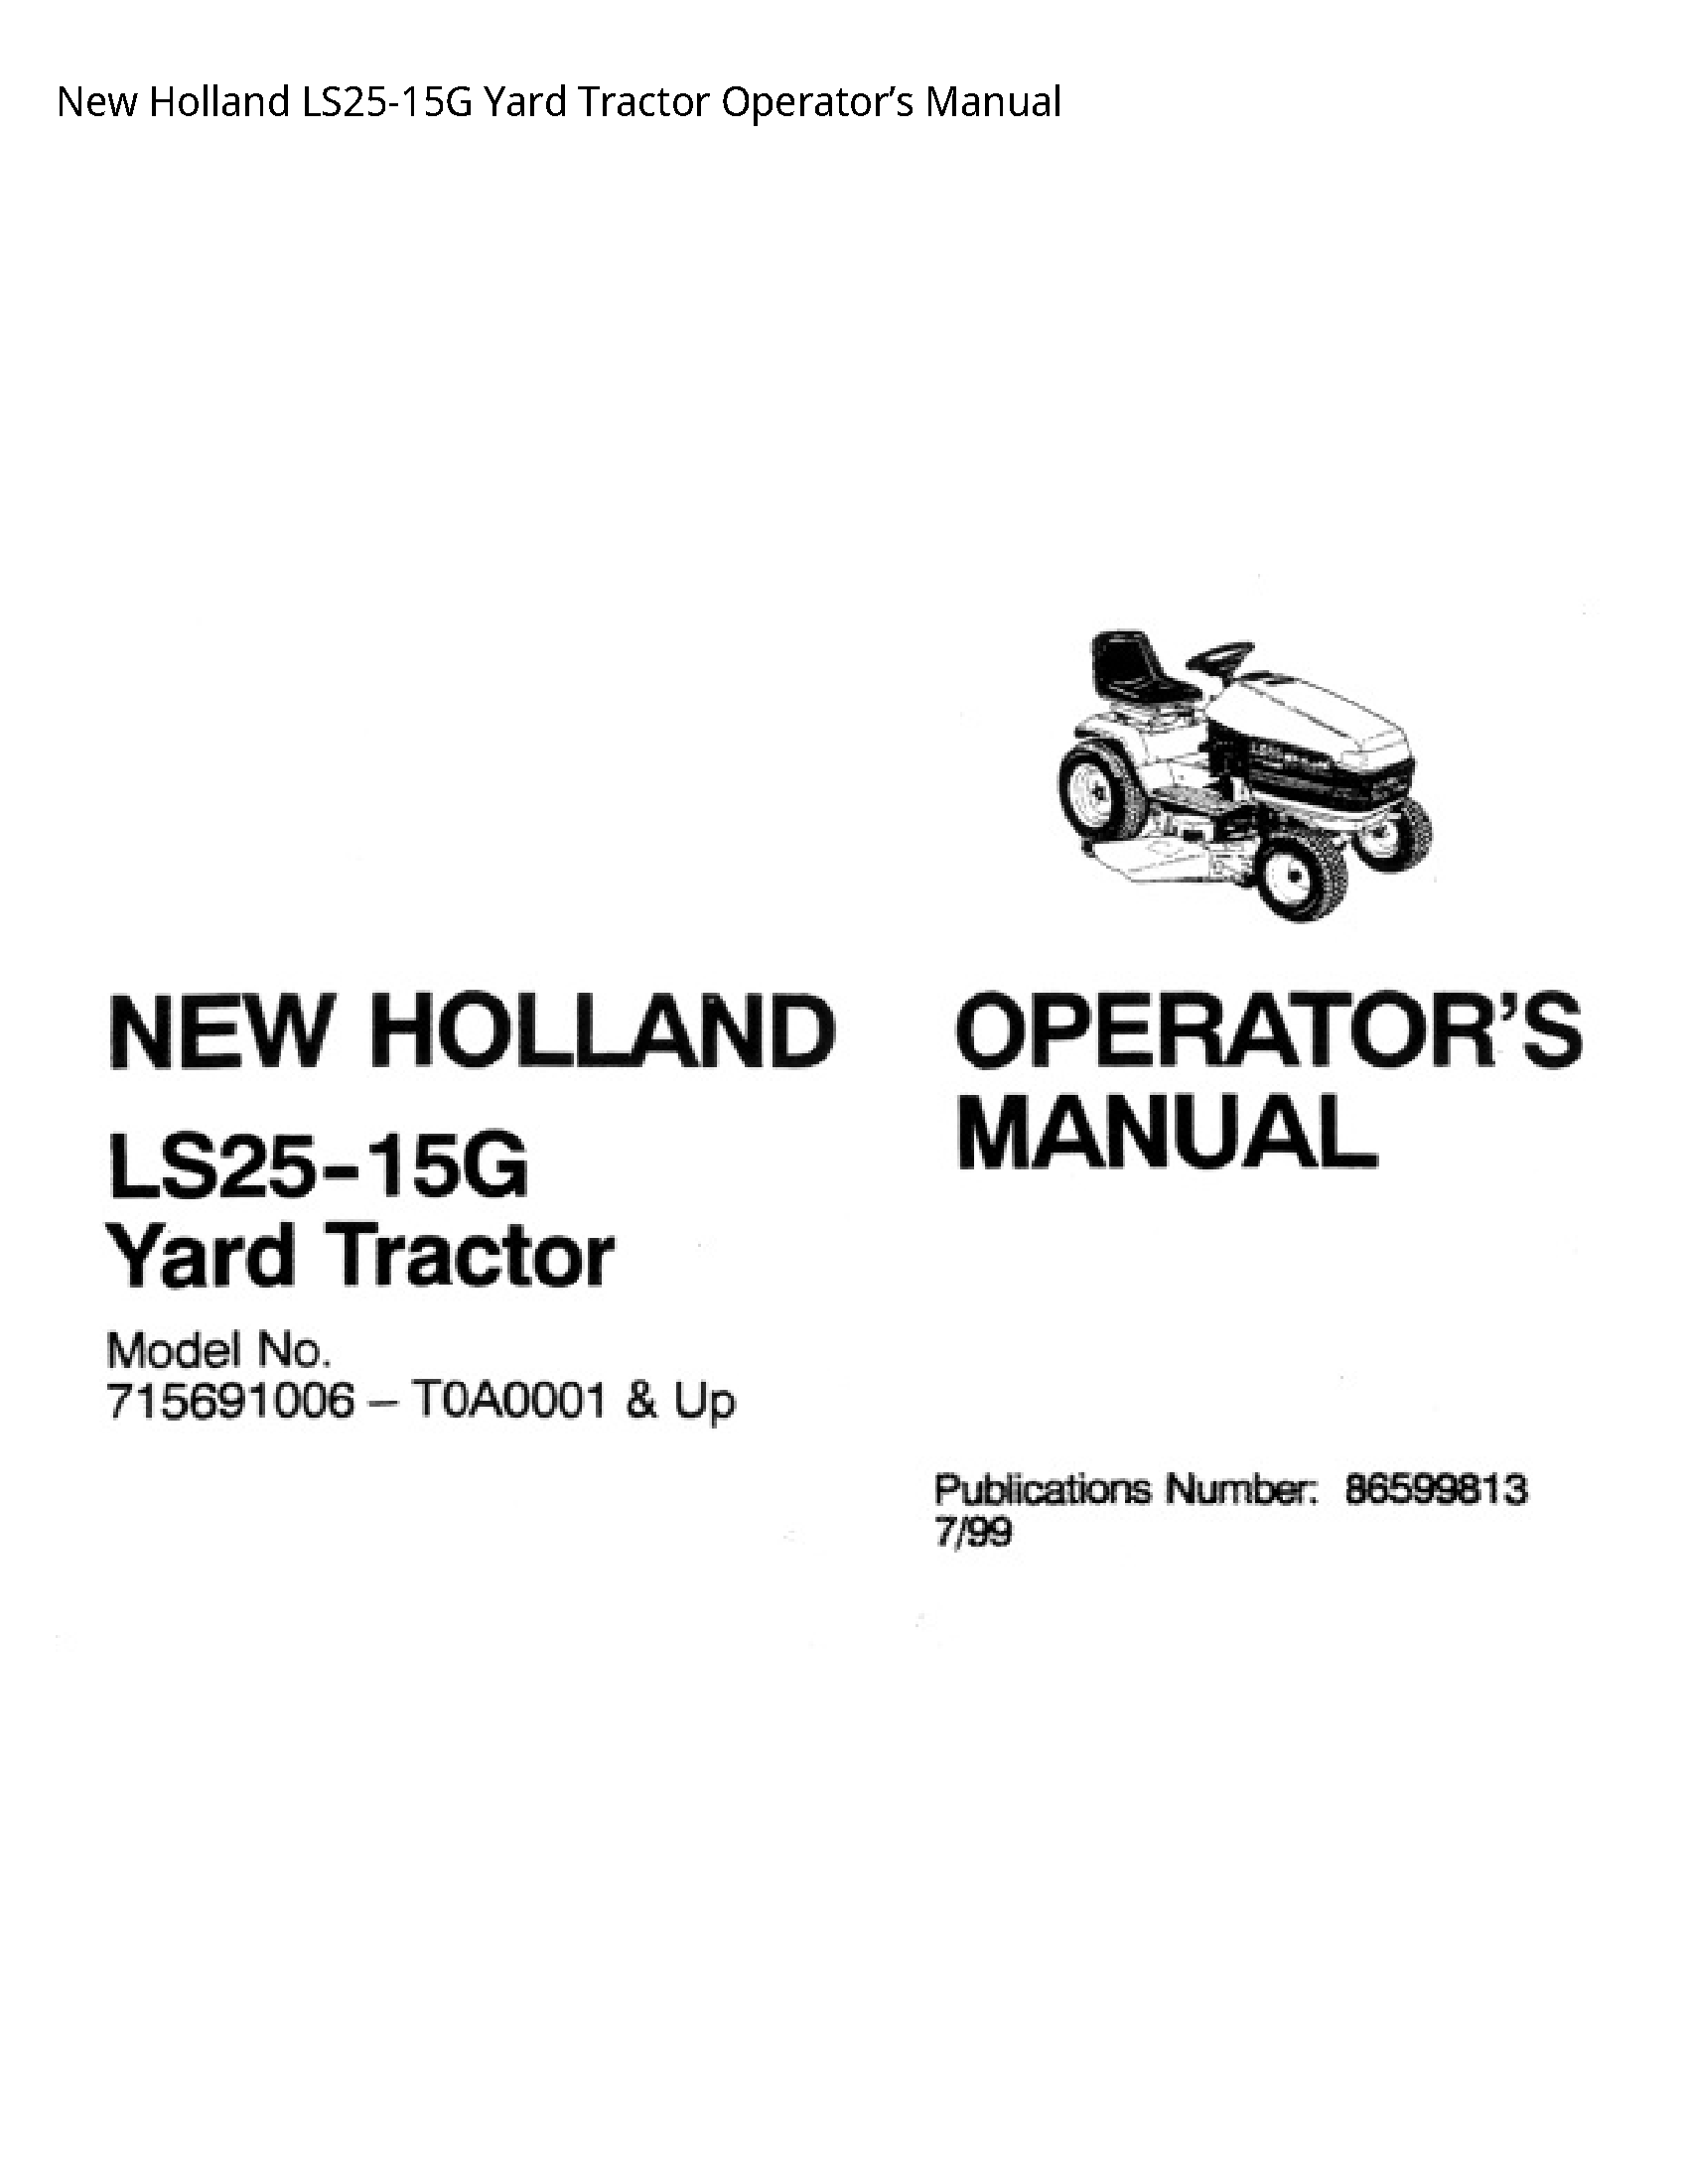 New Holland LS25-15G Yard Tractor Operator’s manual